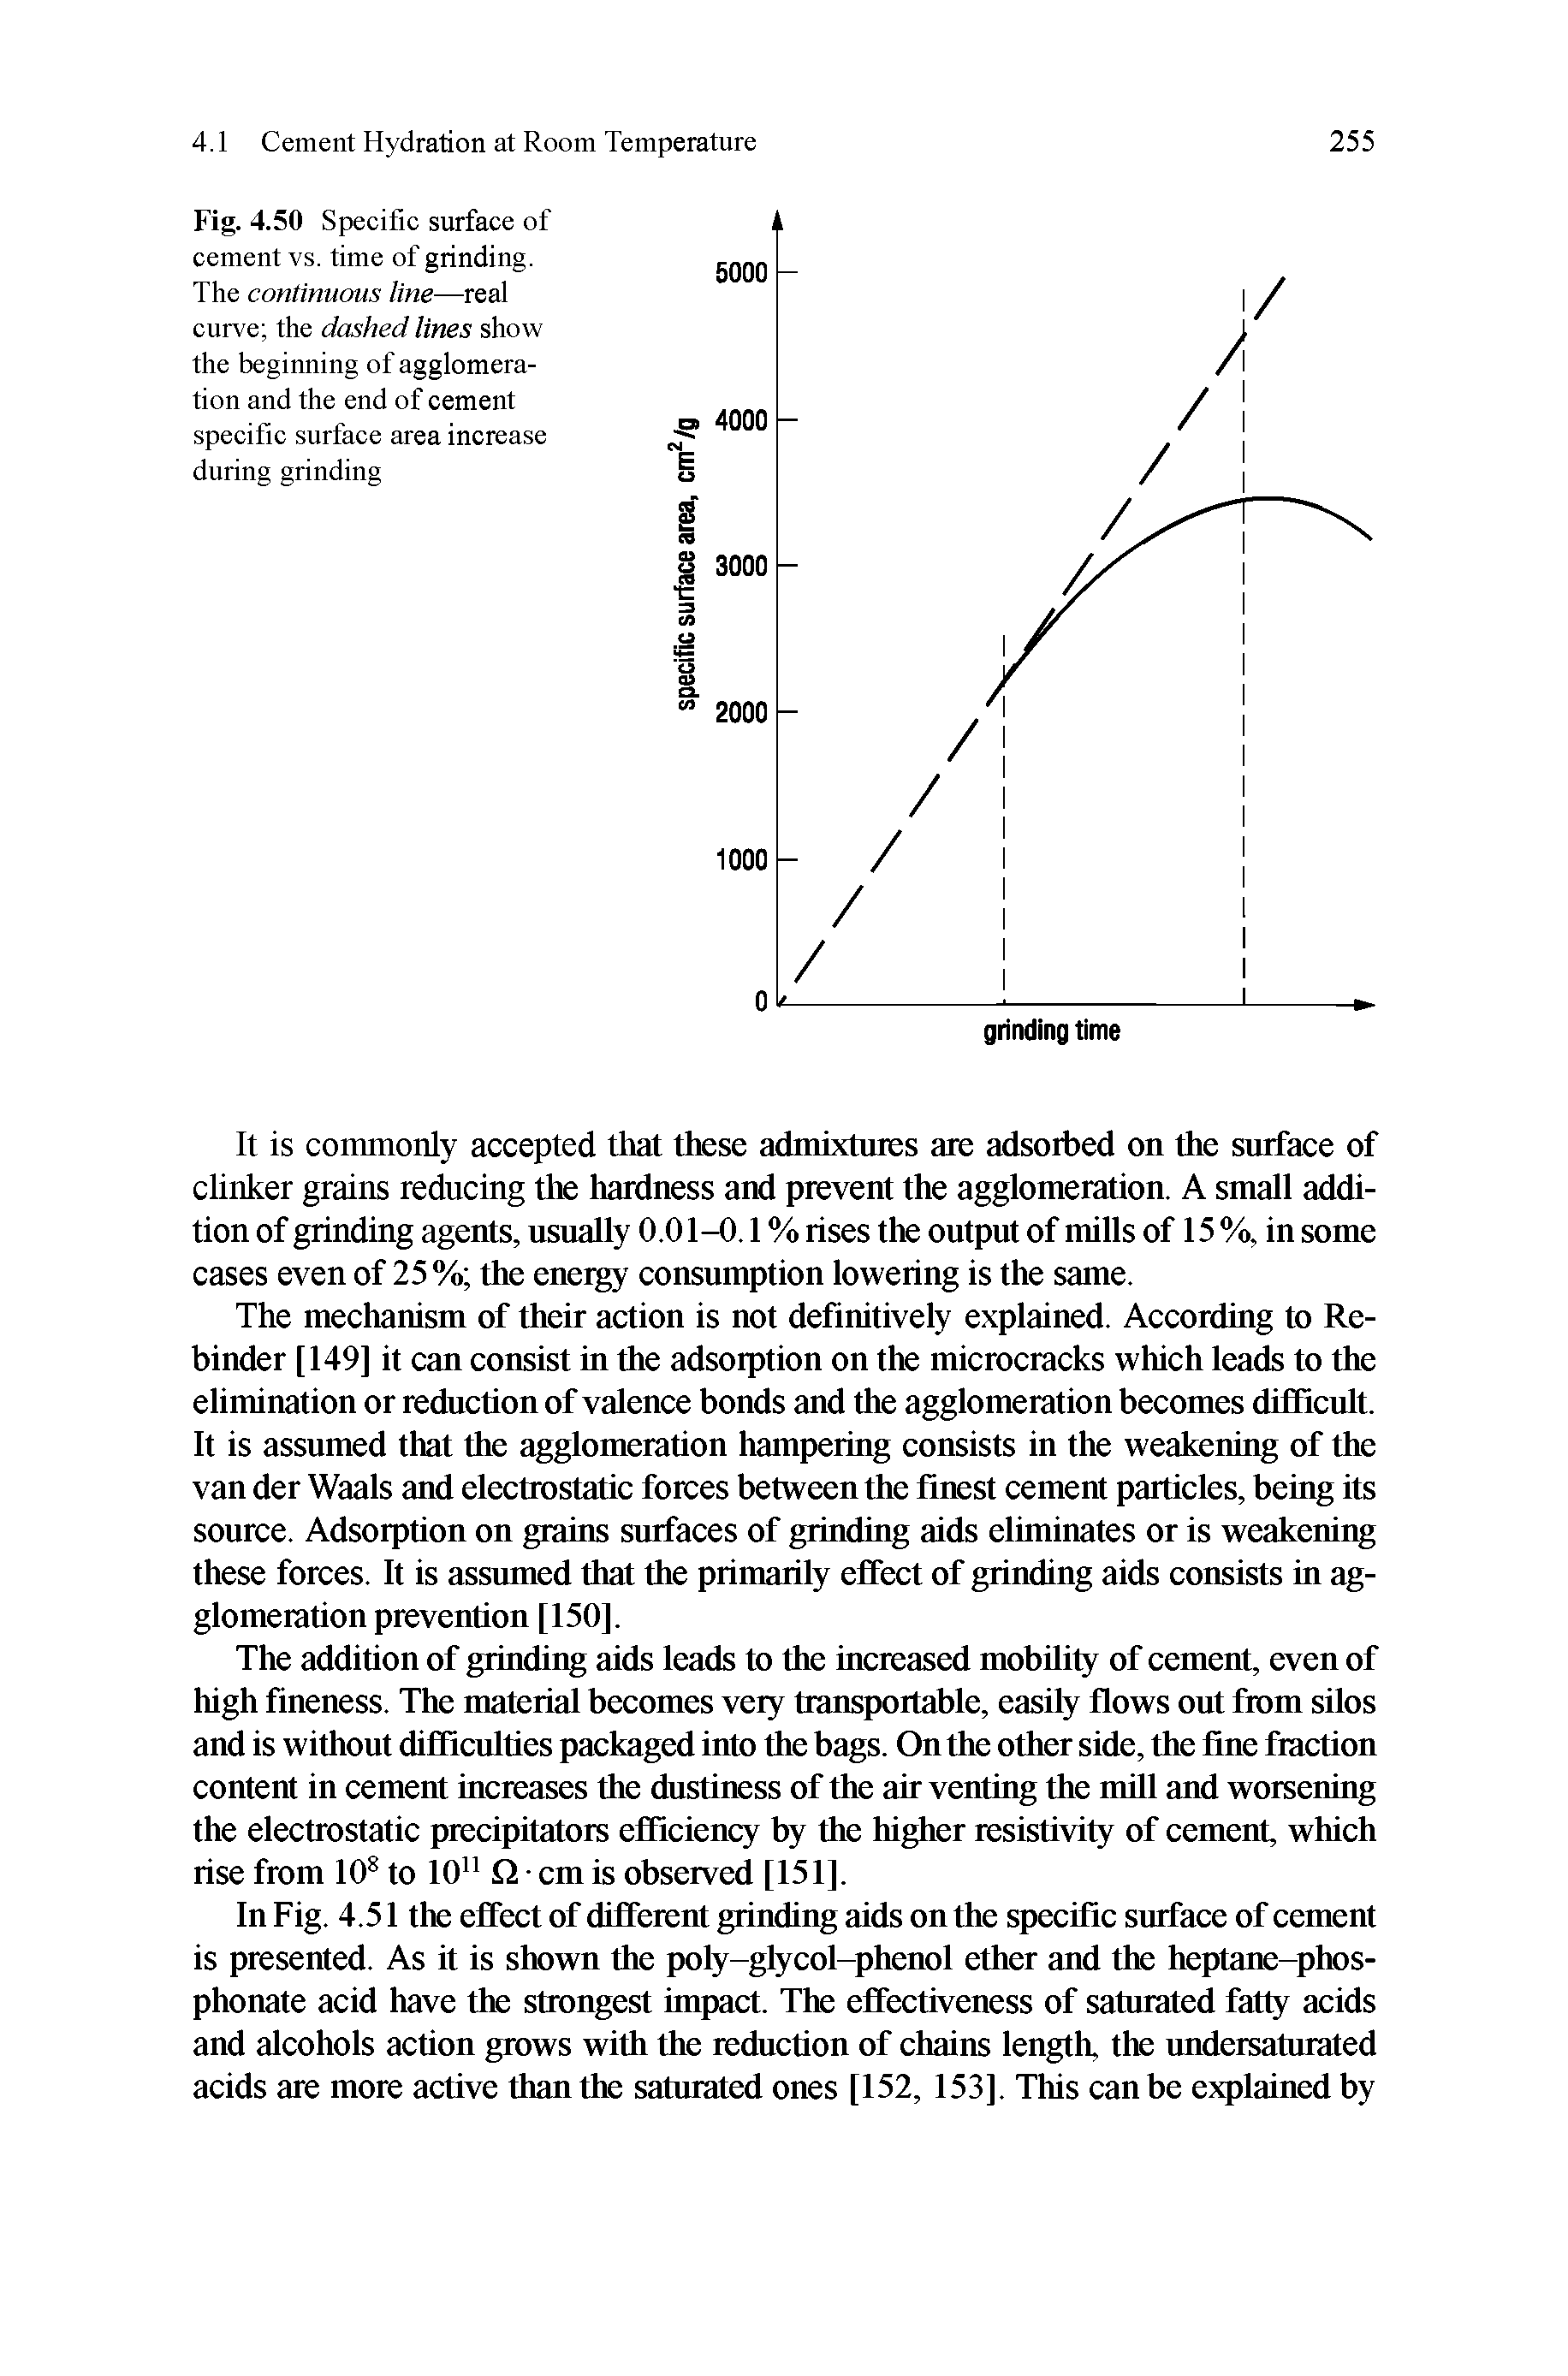 Fig. 4.50 Specific surface of cement vs. time of grinding. The continuous line—real curve the dashed lines show the beginning of agglomeration and the end of cement specific surface area increase during grinding...